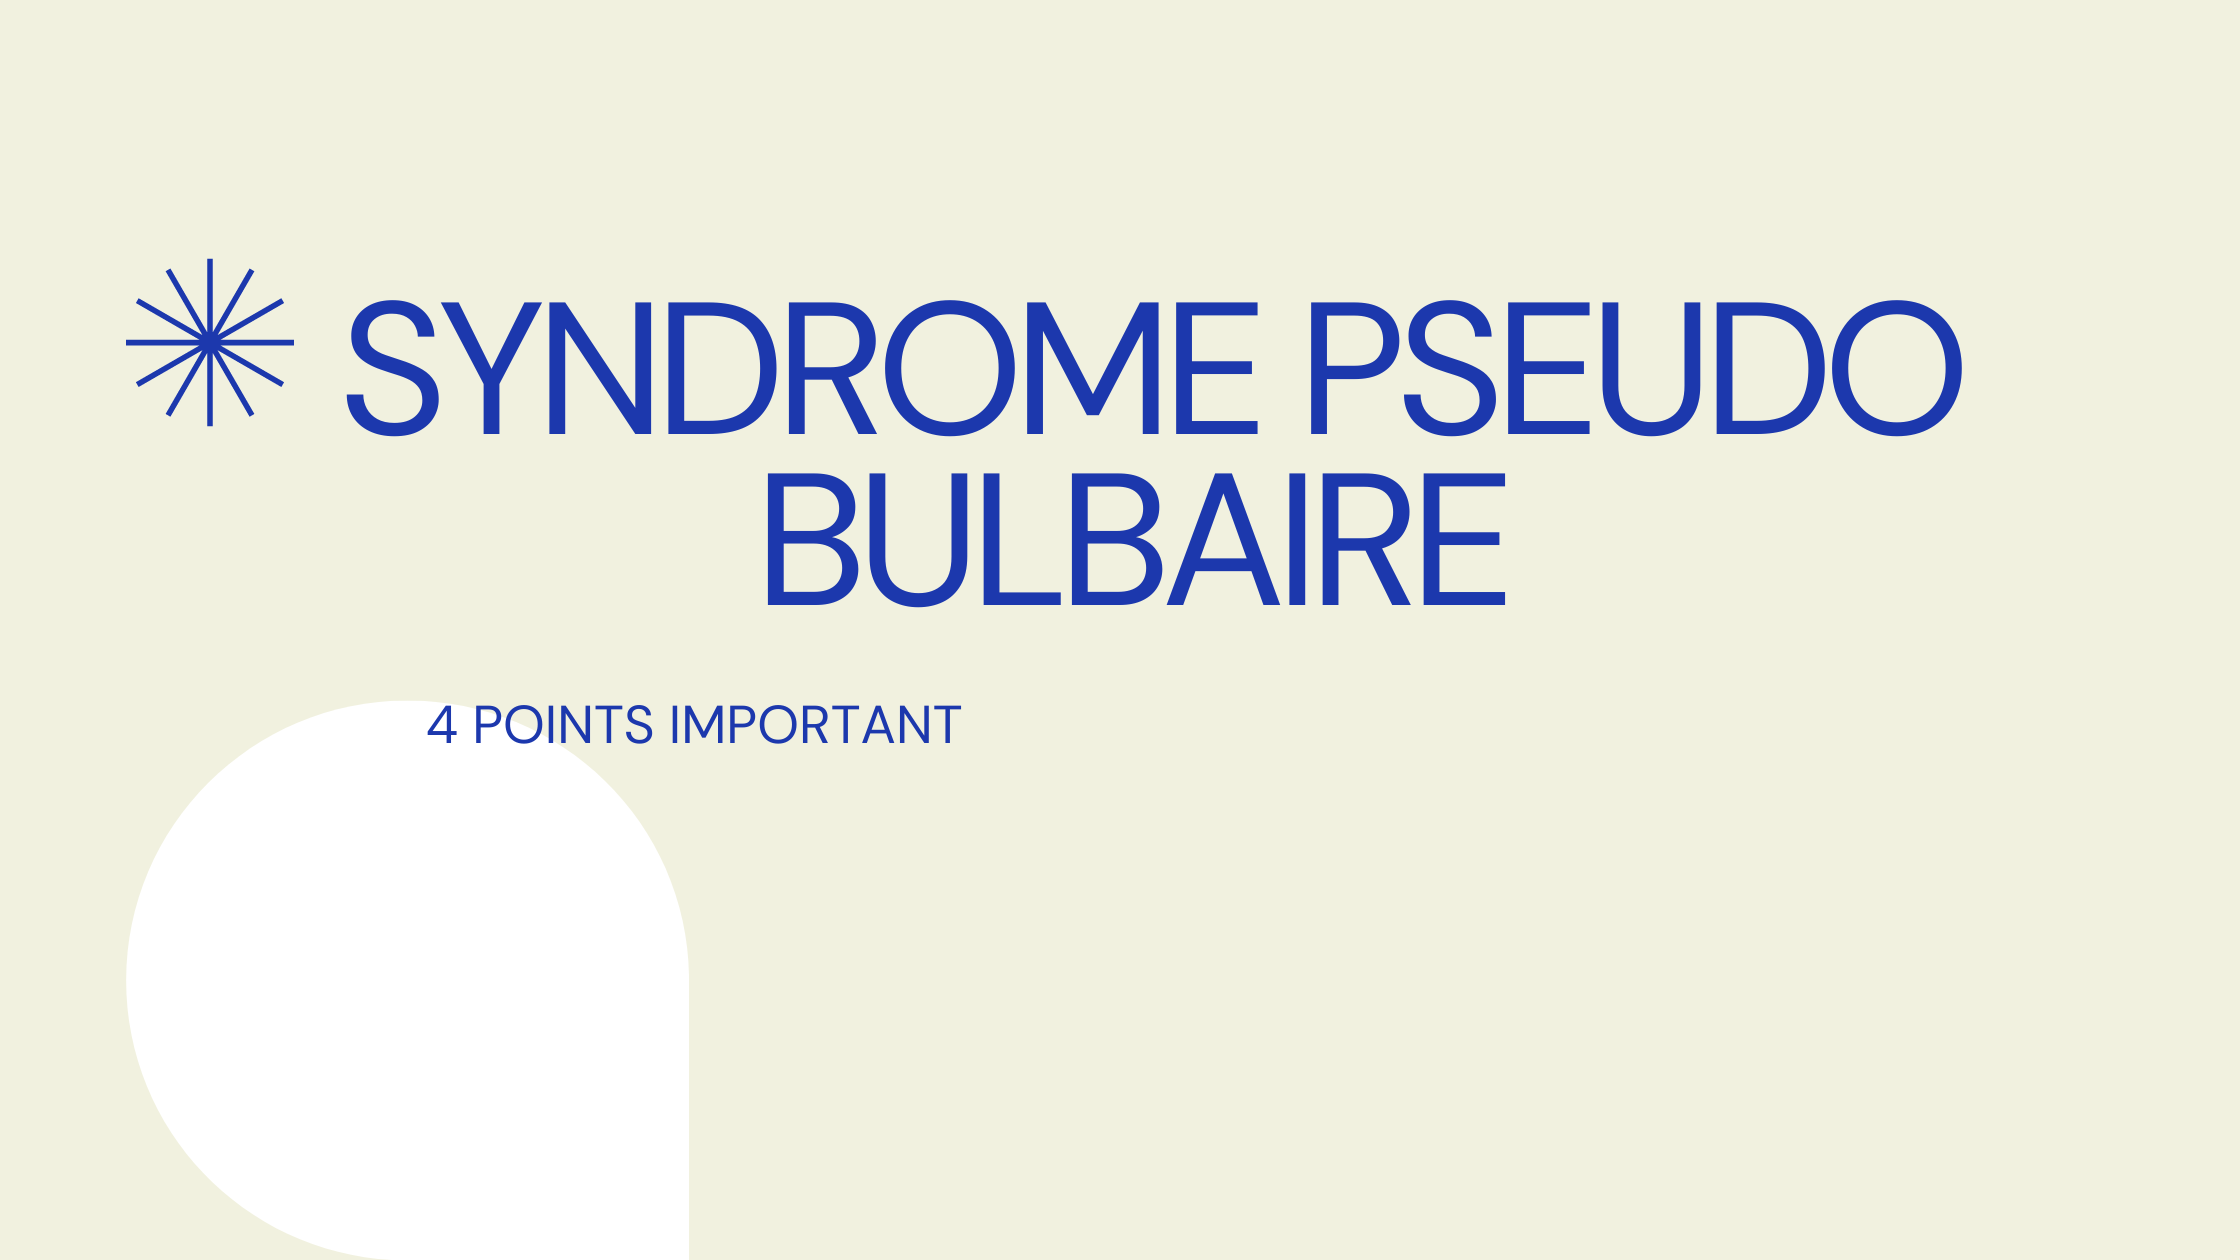 syndrome pseudo bulbaire | 4 Points Important